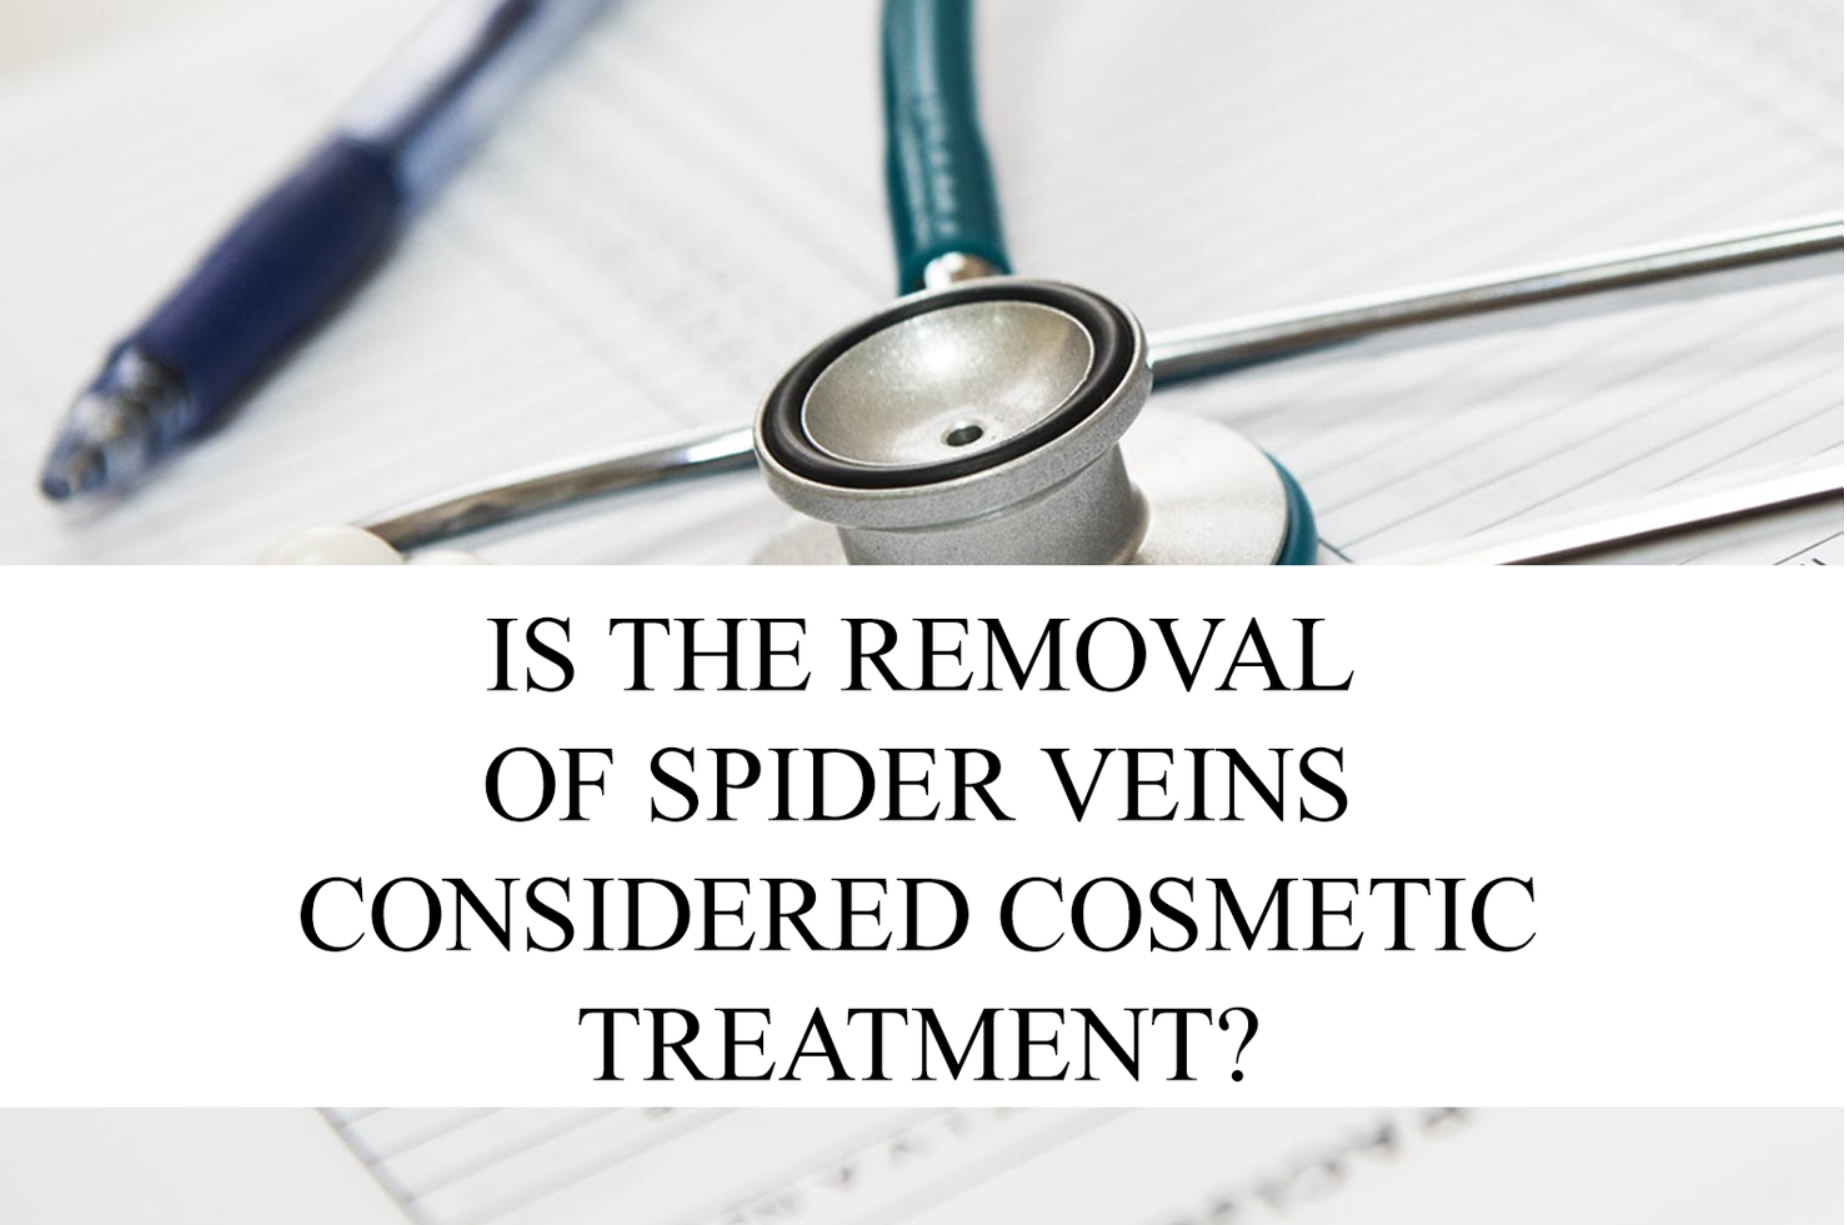 Spider Vein Cosmetic treatment